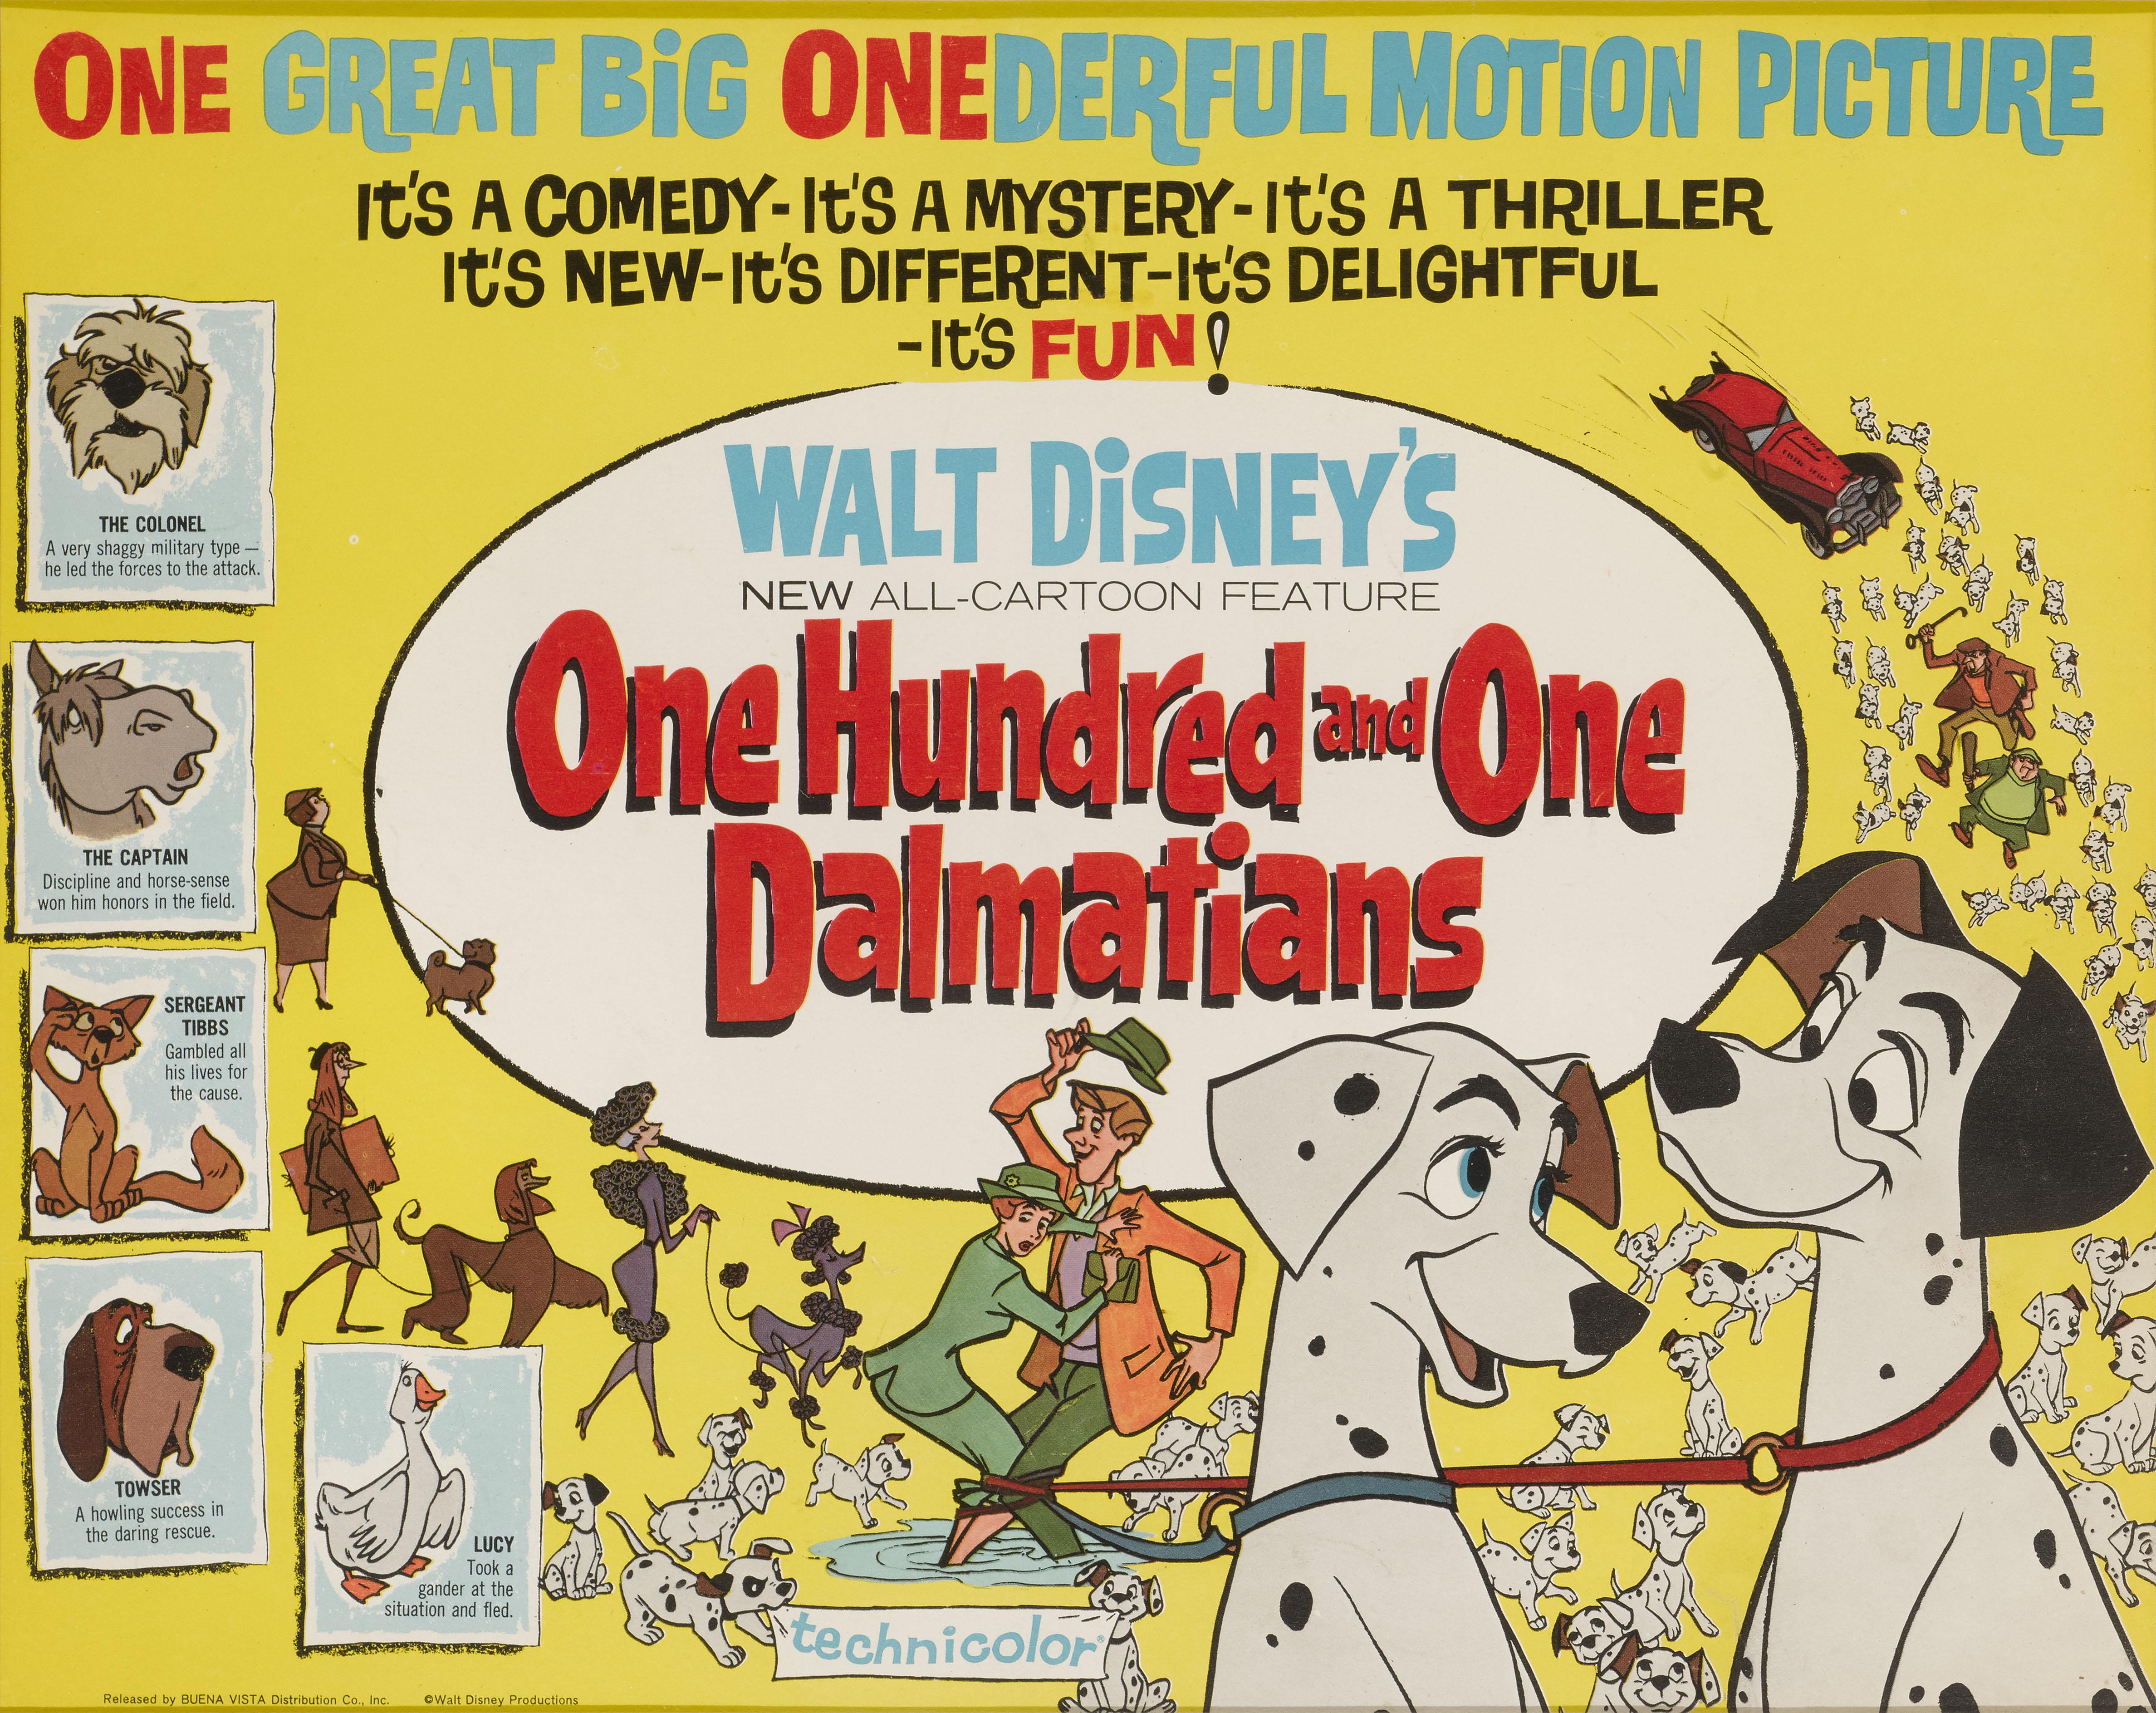 Original US Title lobby card for the 1961 Disney animation One Hundred and One Dalmatians.
This film was was directed Clyde Geronimi and Hamilton Luske.
The piece is conservation framed with UV plexiglass in a Tulip wood frame with acid free card